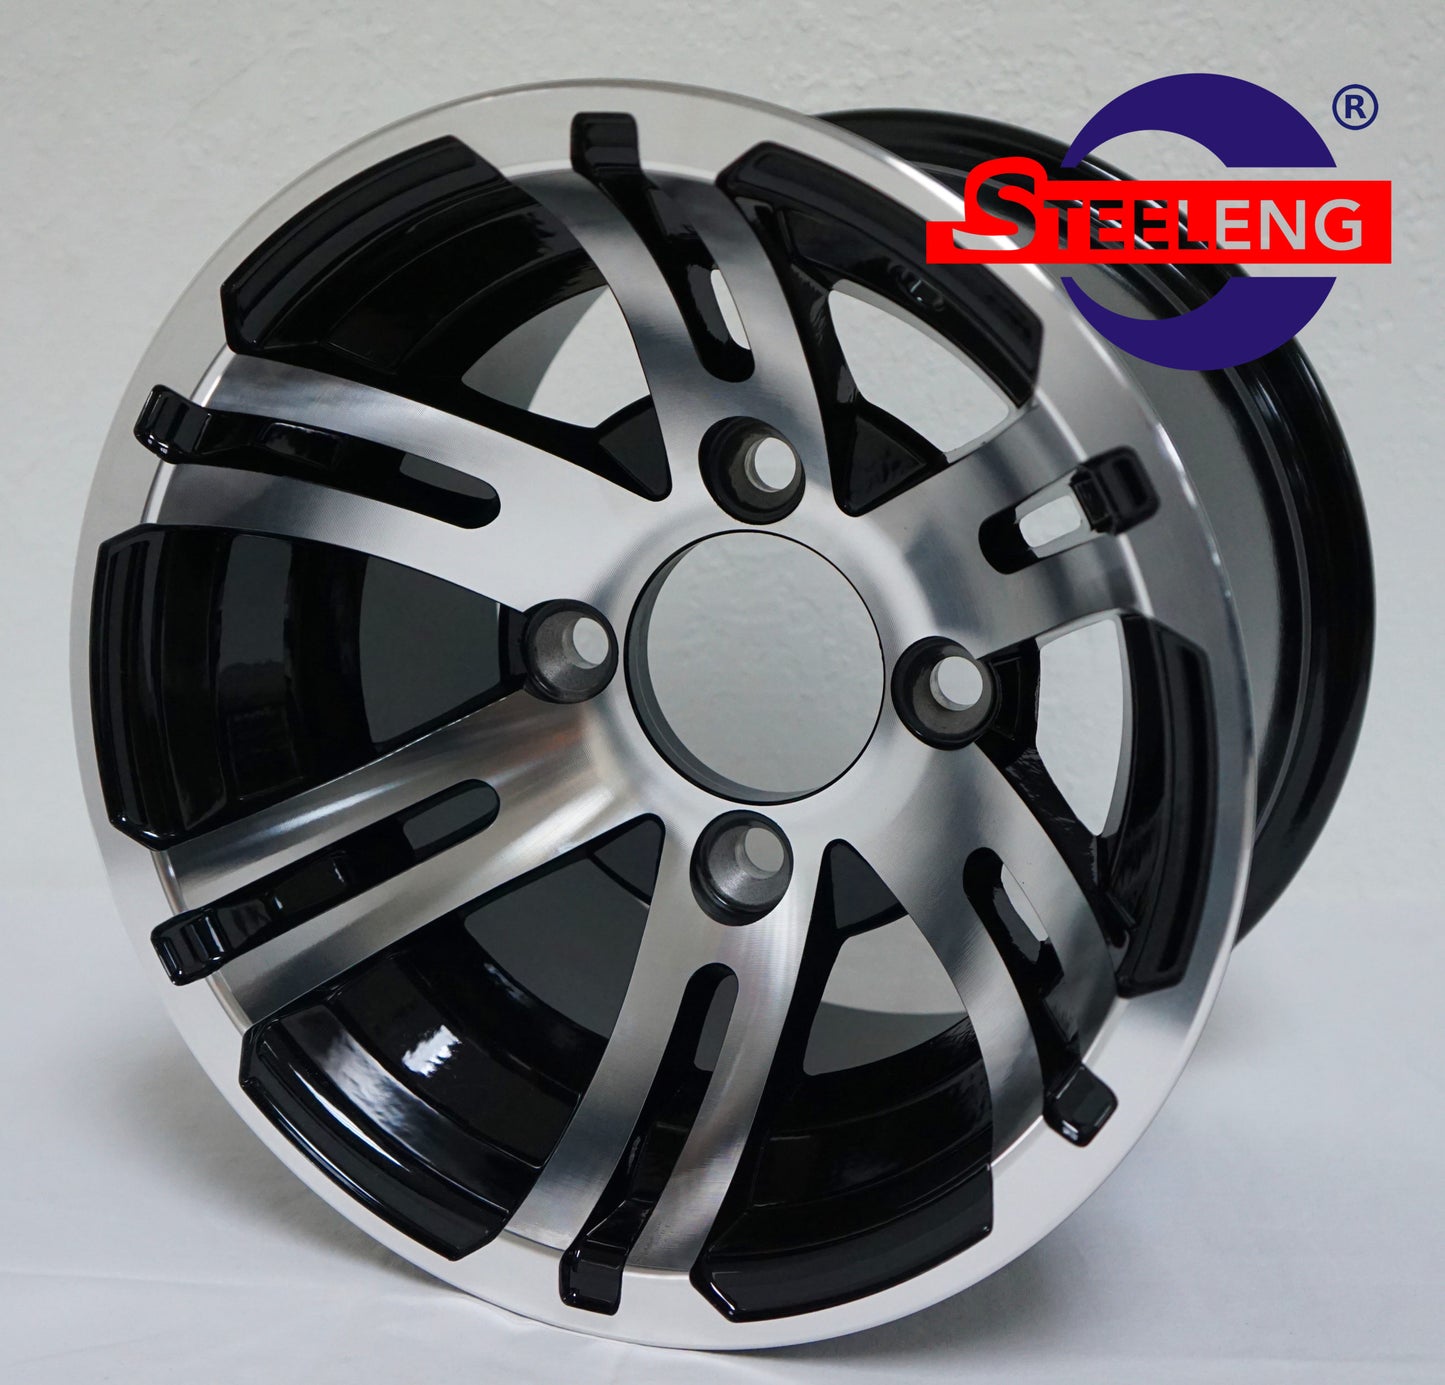 STEELENG 10” Machined/Black ‘Bulldog’ Wheels With 22"x10.5"-10" Tires